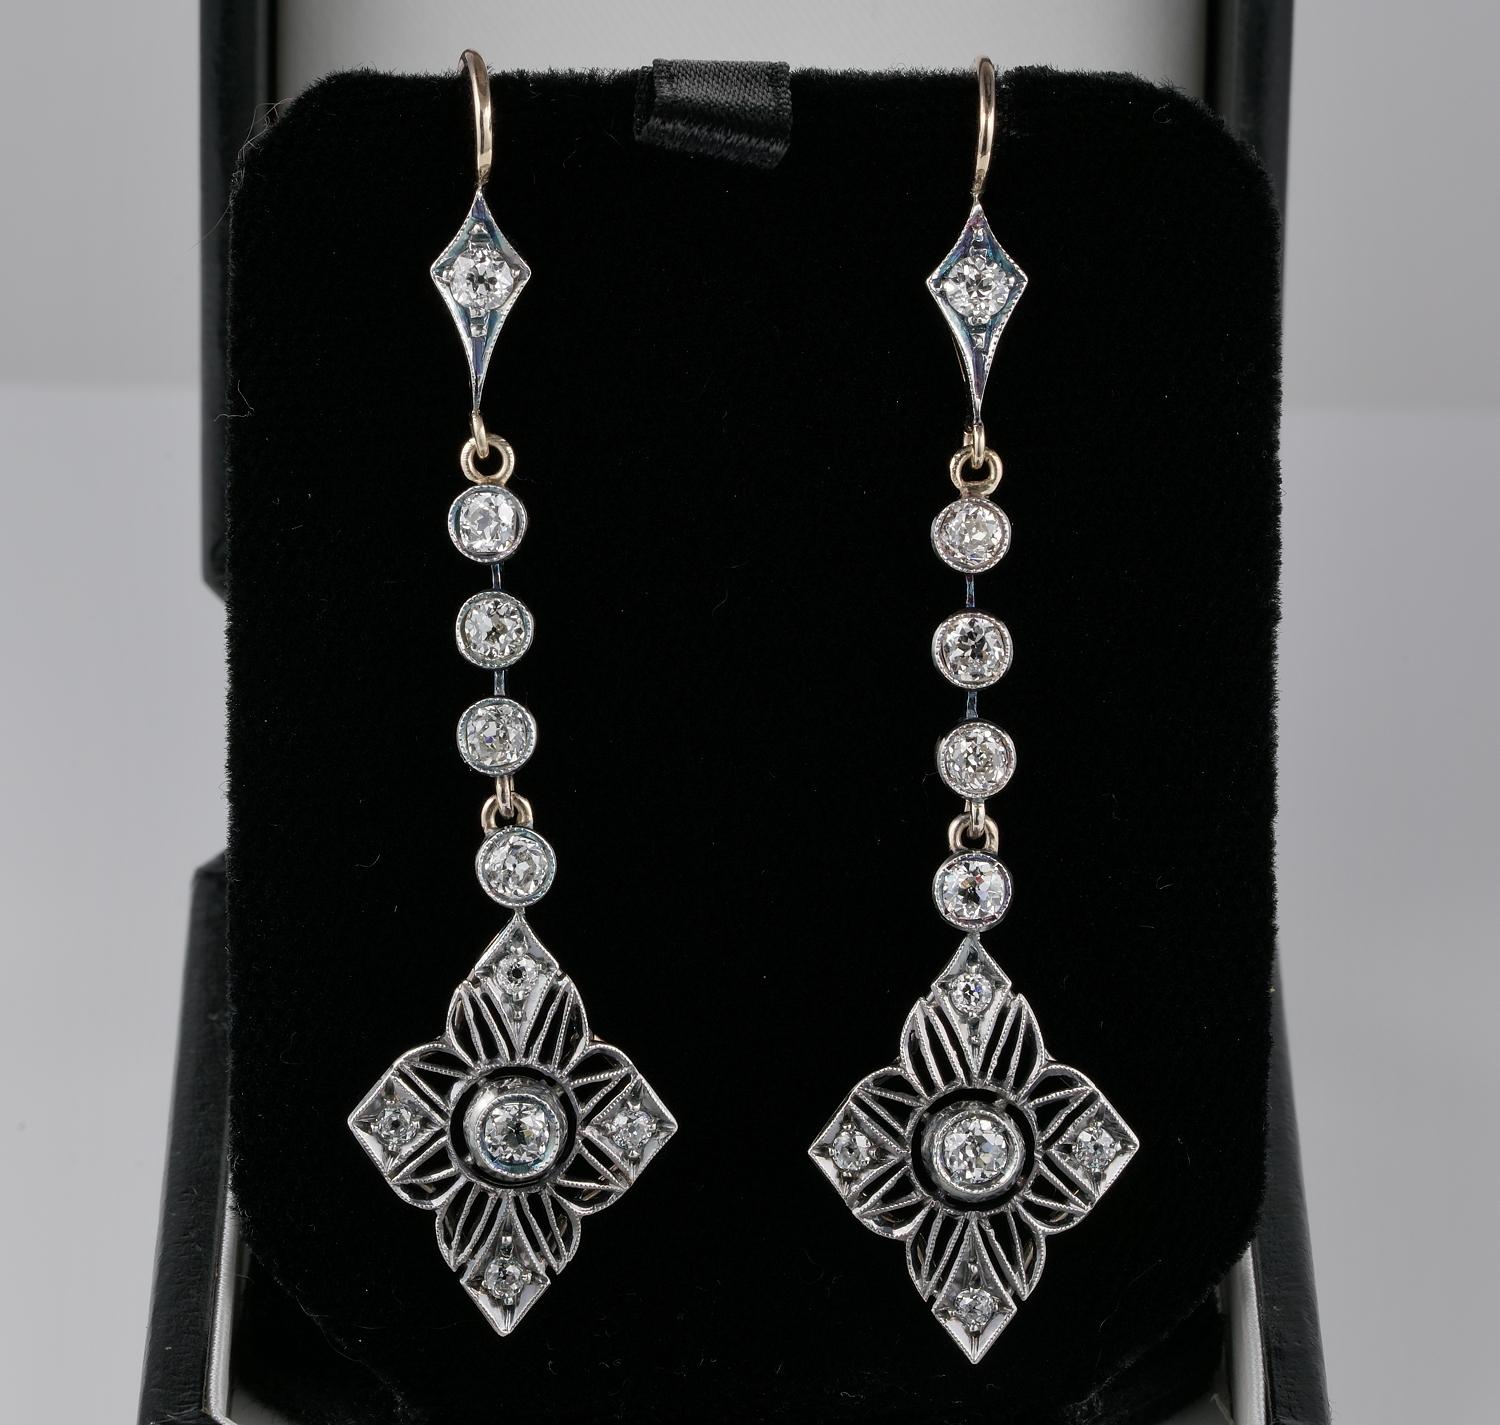 Art Nouveau

Art Nouveau was more than just a style, it was a mindset that followed the philosophical idea that “art should be a way of a way of life”
This outstanding pair of drop earrings are just witness of that period movement, 1900 ca
Wearing